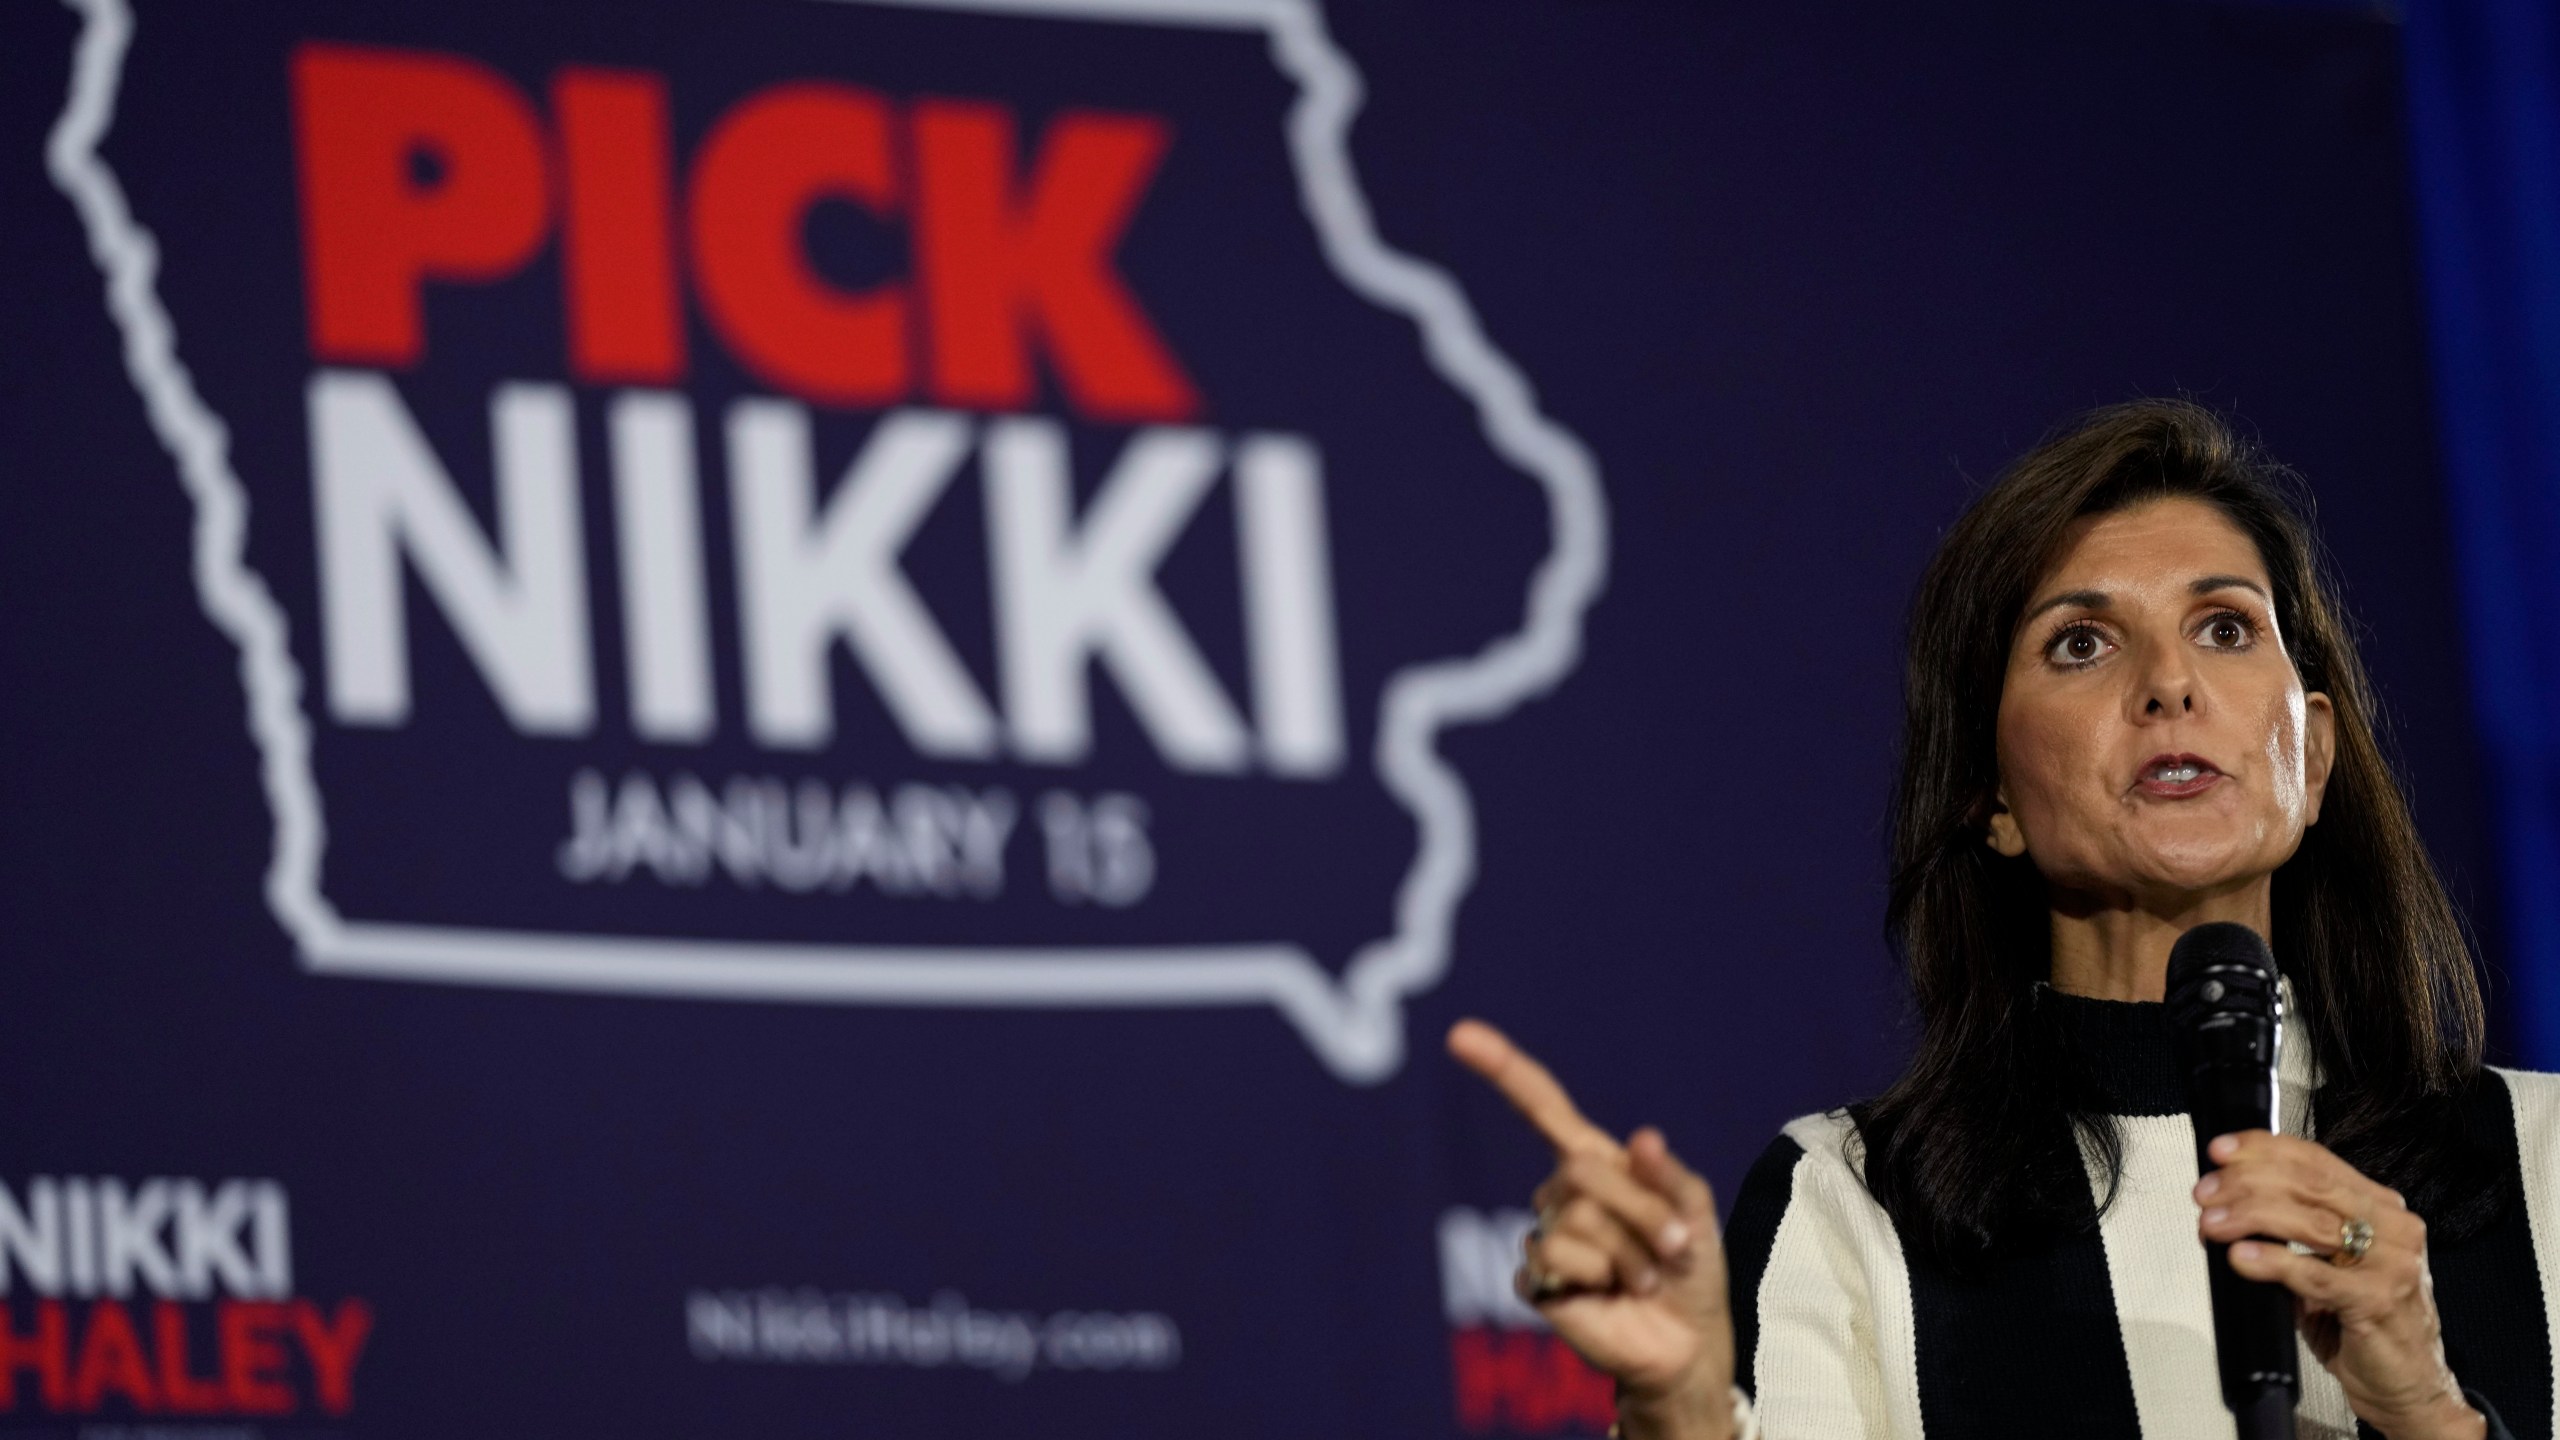 FILE - Republican presidential candidate Nikki Haley speaks during a town hall, Friday, Dec. 8, 2023, in Sioux City, Iowa. Former President Donald Trump was the first choice of 51% of likely Iowa caucus participants in a Des Moines Register-NBC News-Mediacom Iowa Poll published Monday, Dec. 11. Florida Gov. Ron DeSantis, who has vowed that he will win Iowa, had the support of 19%. Former United Nations Ambassador Nikki Haley, who has suggested she can beat DeSantis in the state and go head to head with Trump in later primaries, was at 16%. (AP Photo/Charlie Neibergall, File)